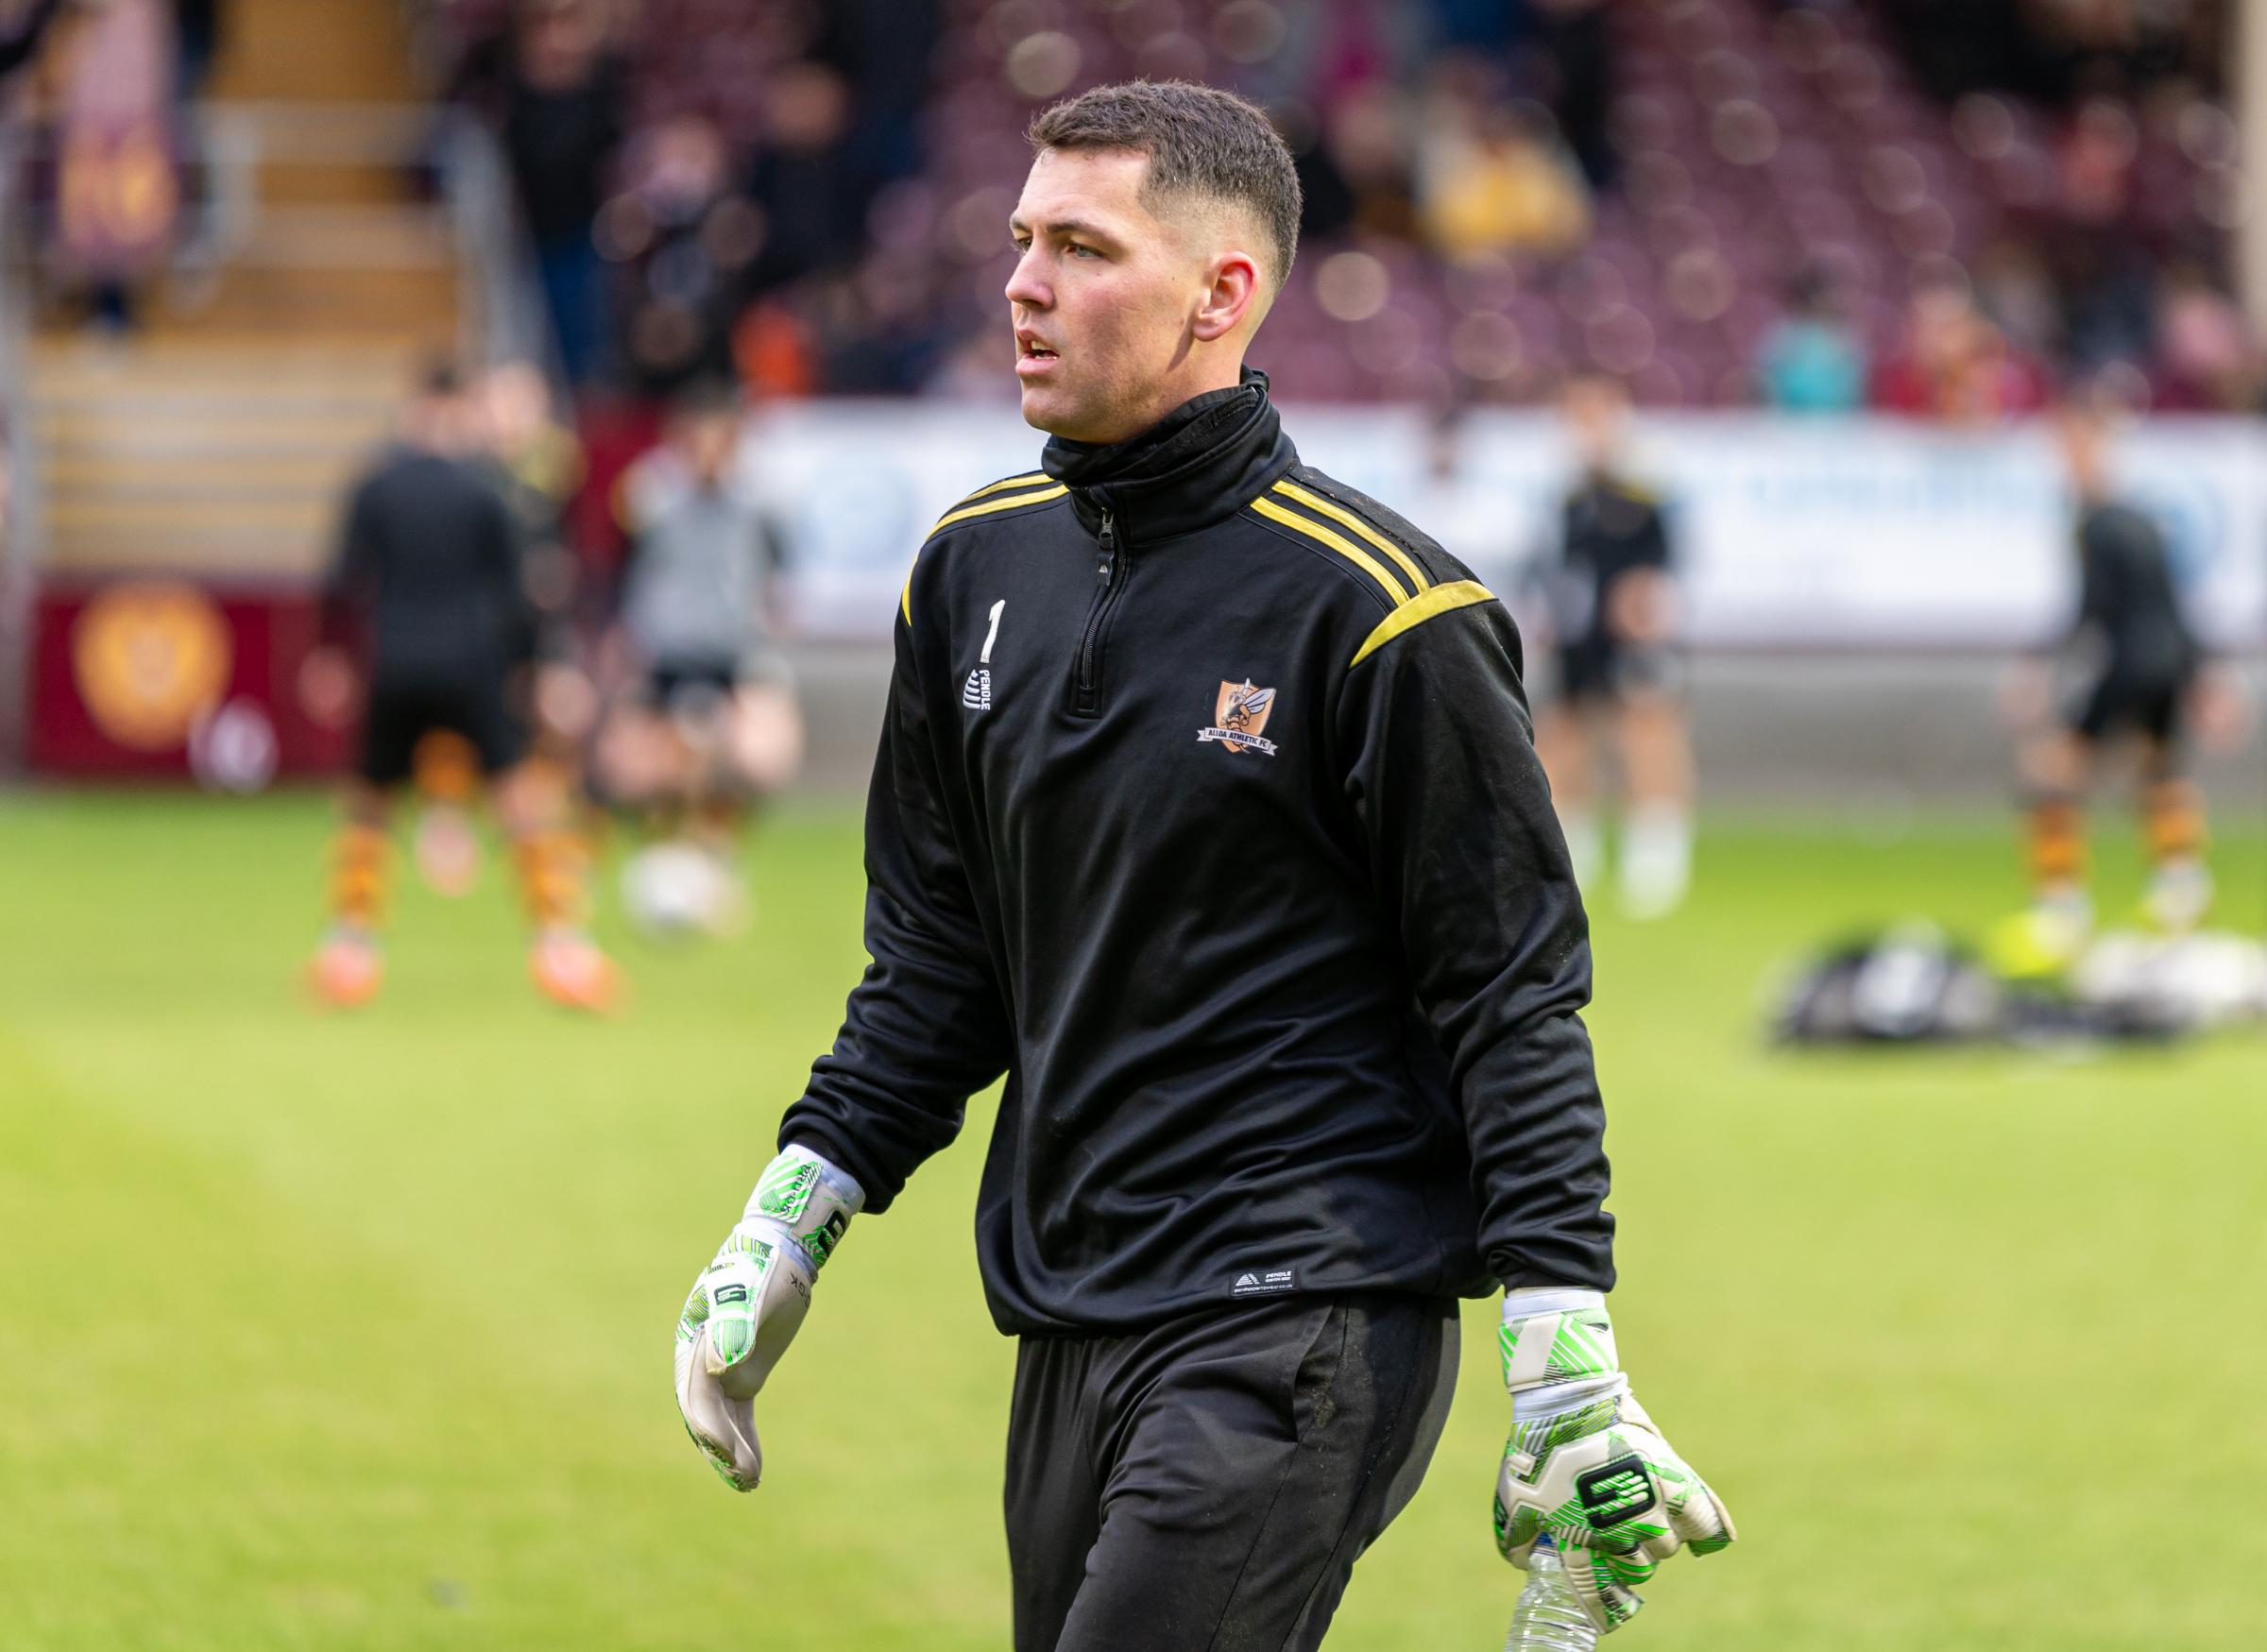 PJ Morrison signs contract extension with Alloa Athletic